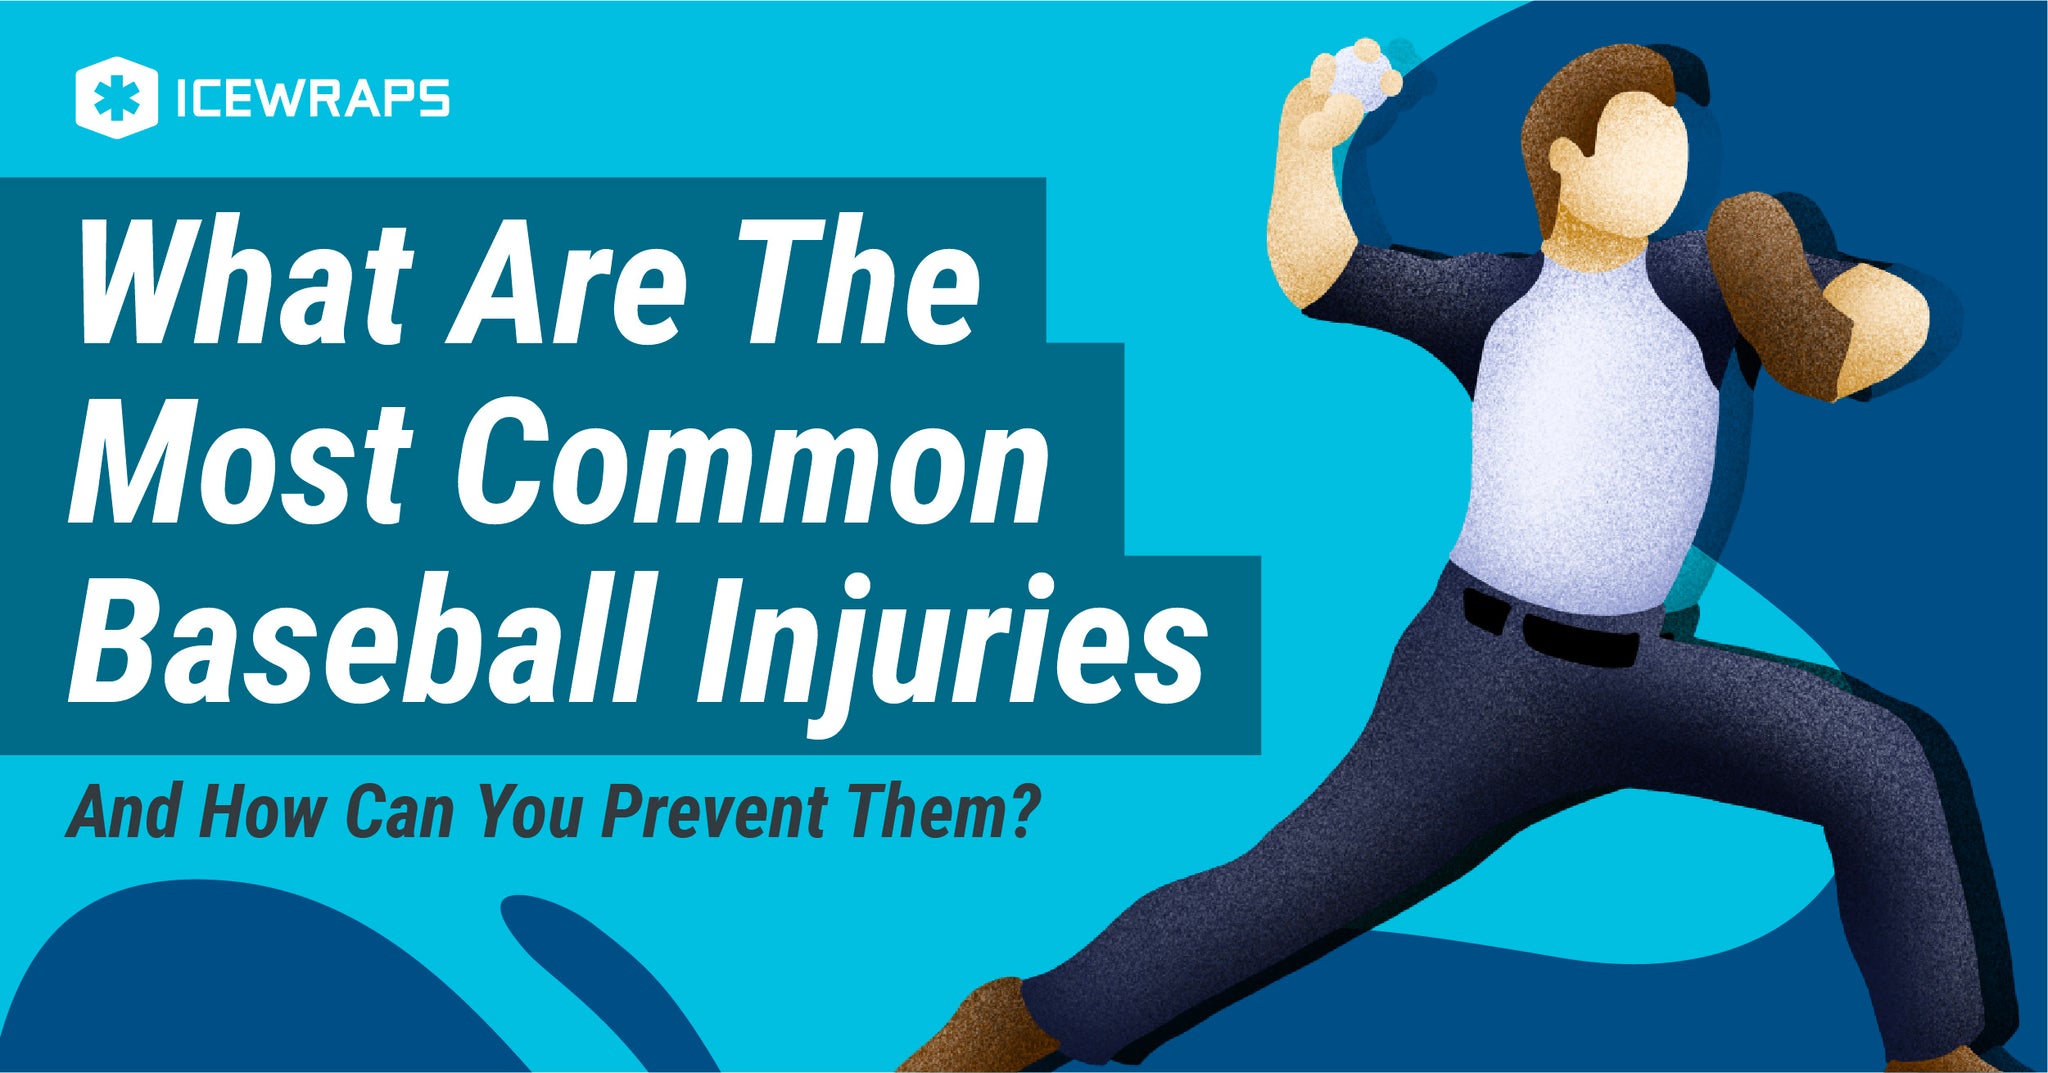 What Are The Most Common Baseball Injuries And How Can You Prevent The